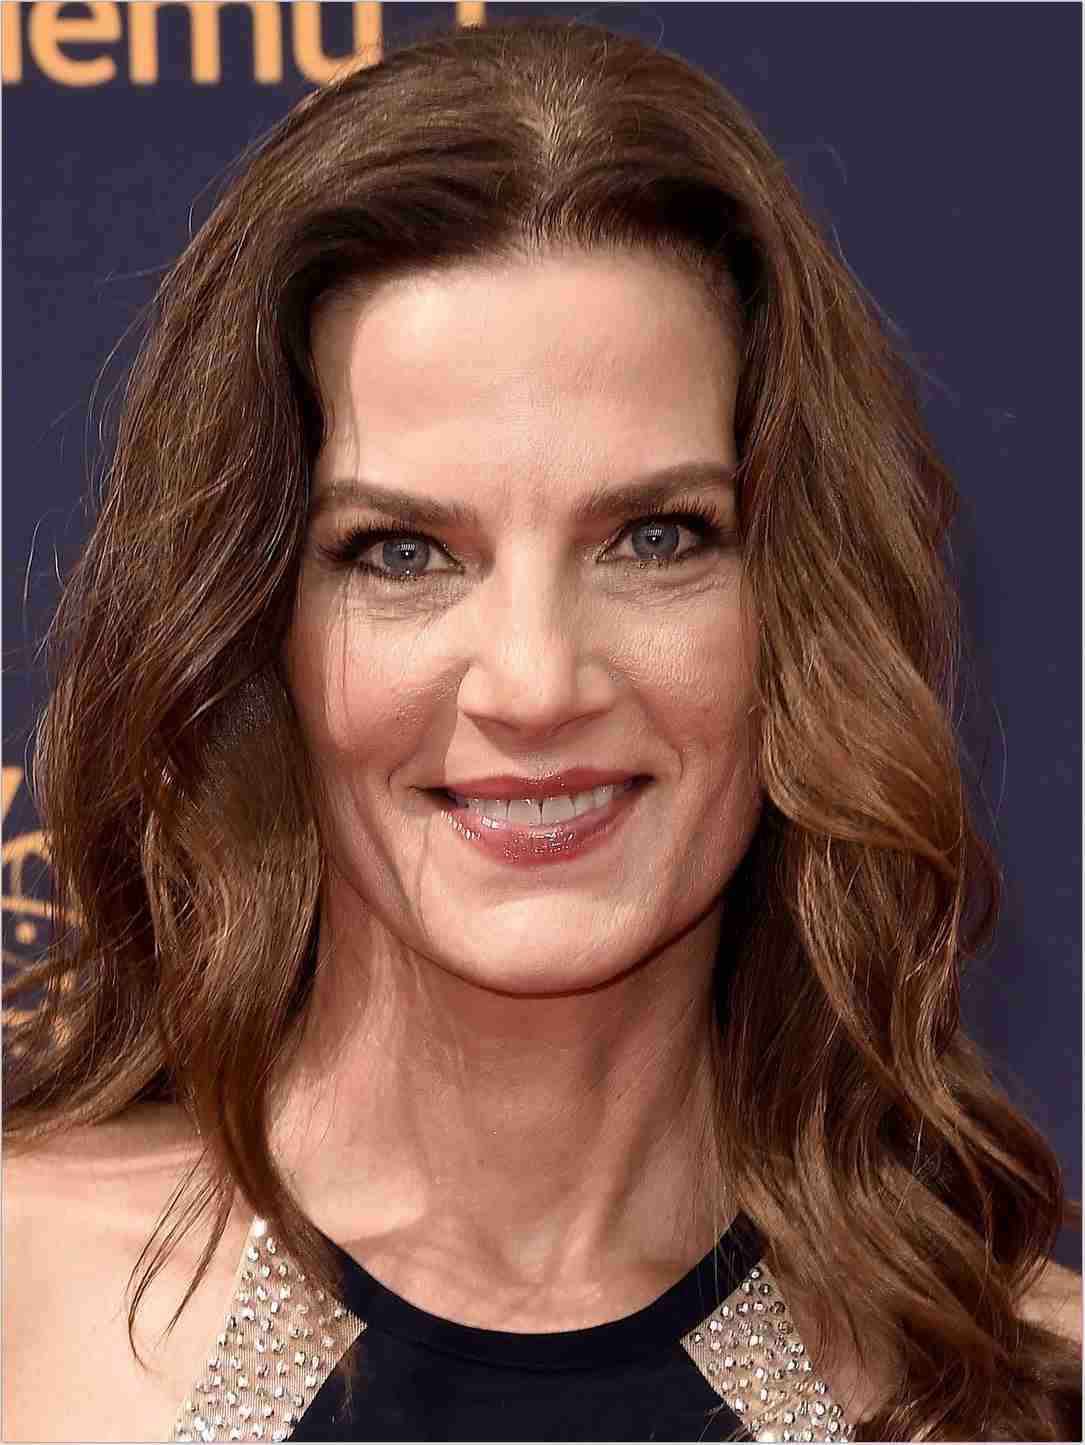 Terry Farrell Net Worth, Bio, Height, Family, Age, Weight, Wiki - 2021